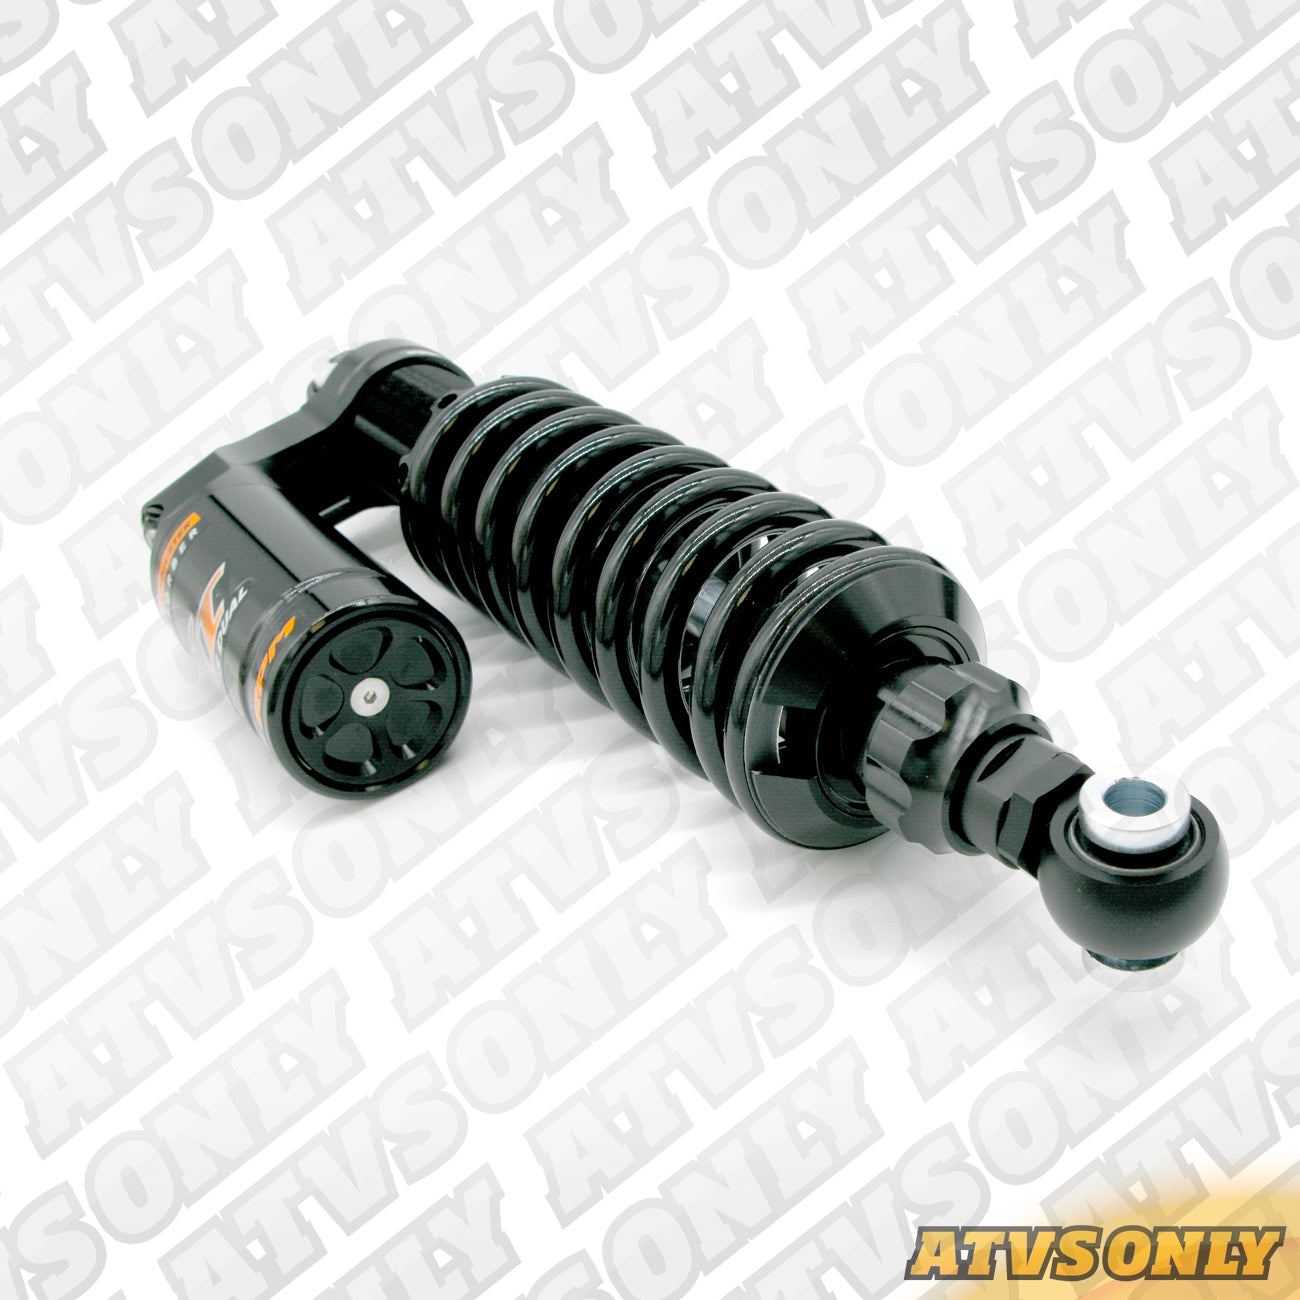 Suspension - RPM Series Front/Rear Lowered Suspension 335mm for Yamaha Raptor 700